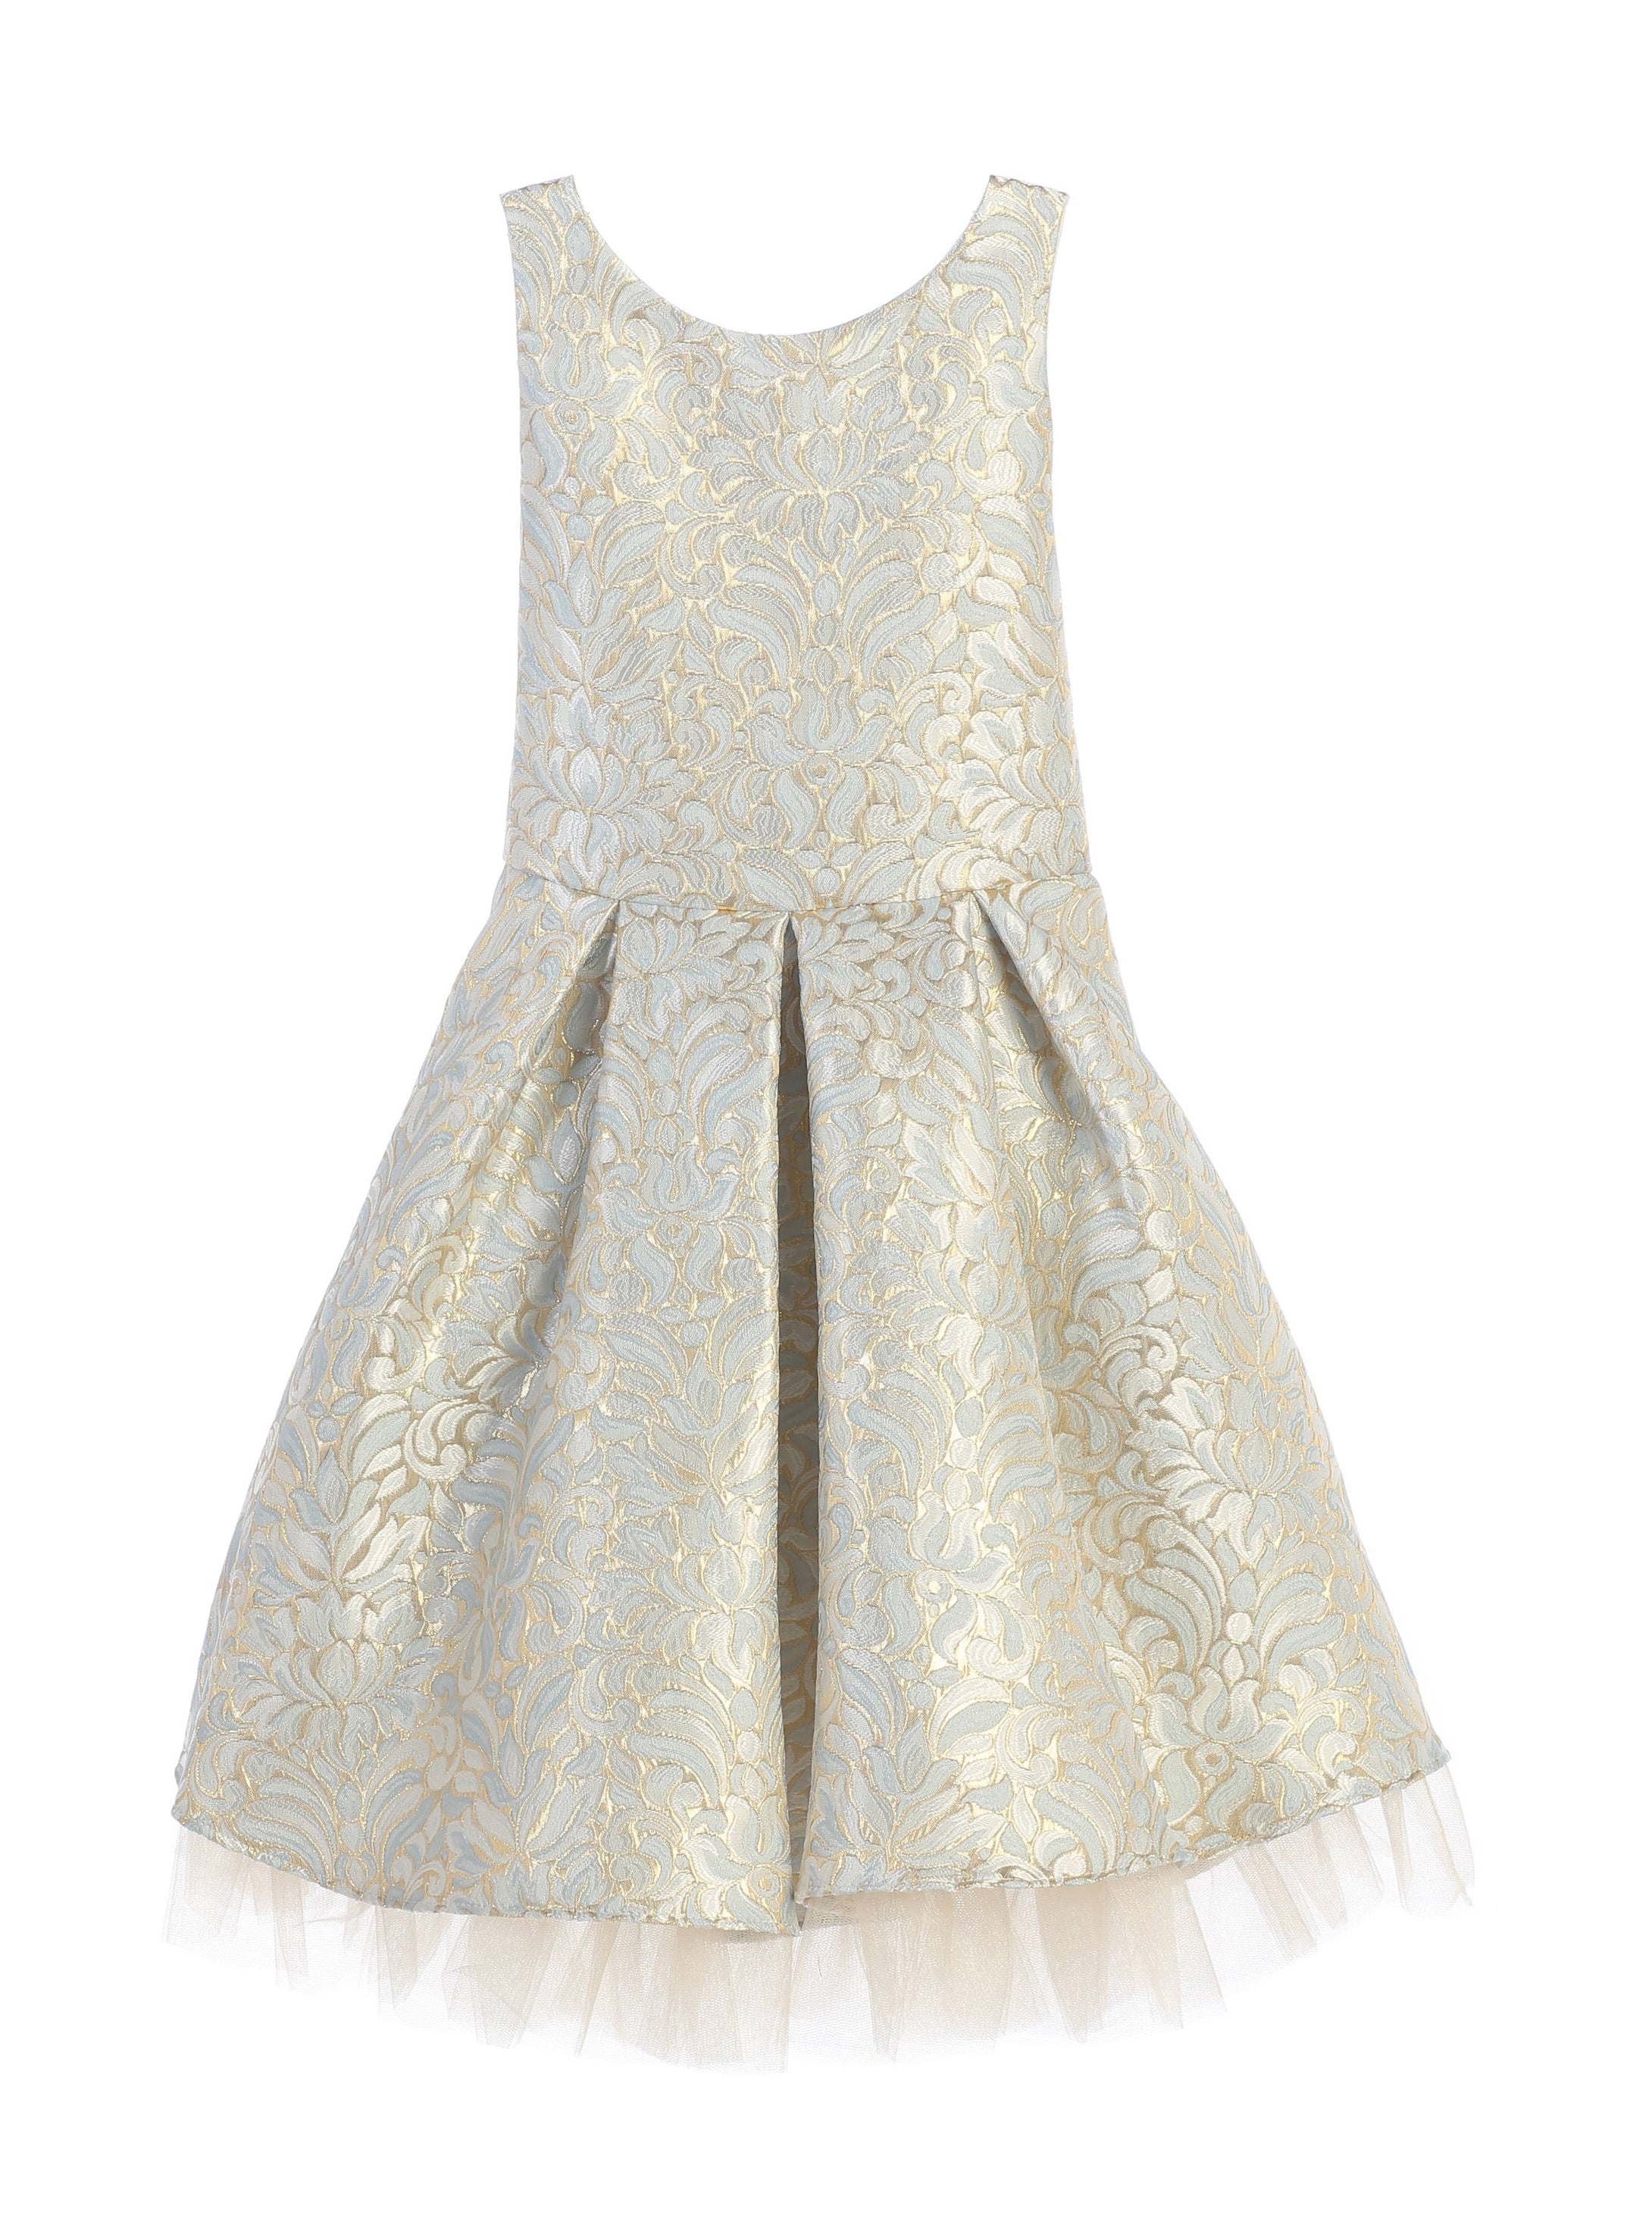 SK670 - ornate gold detail pleated jacquard cocktail dress